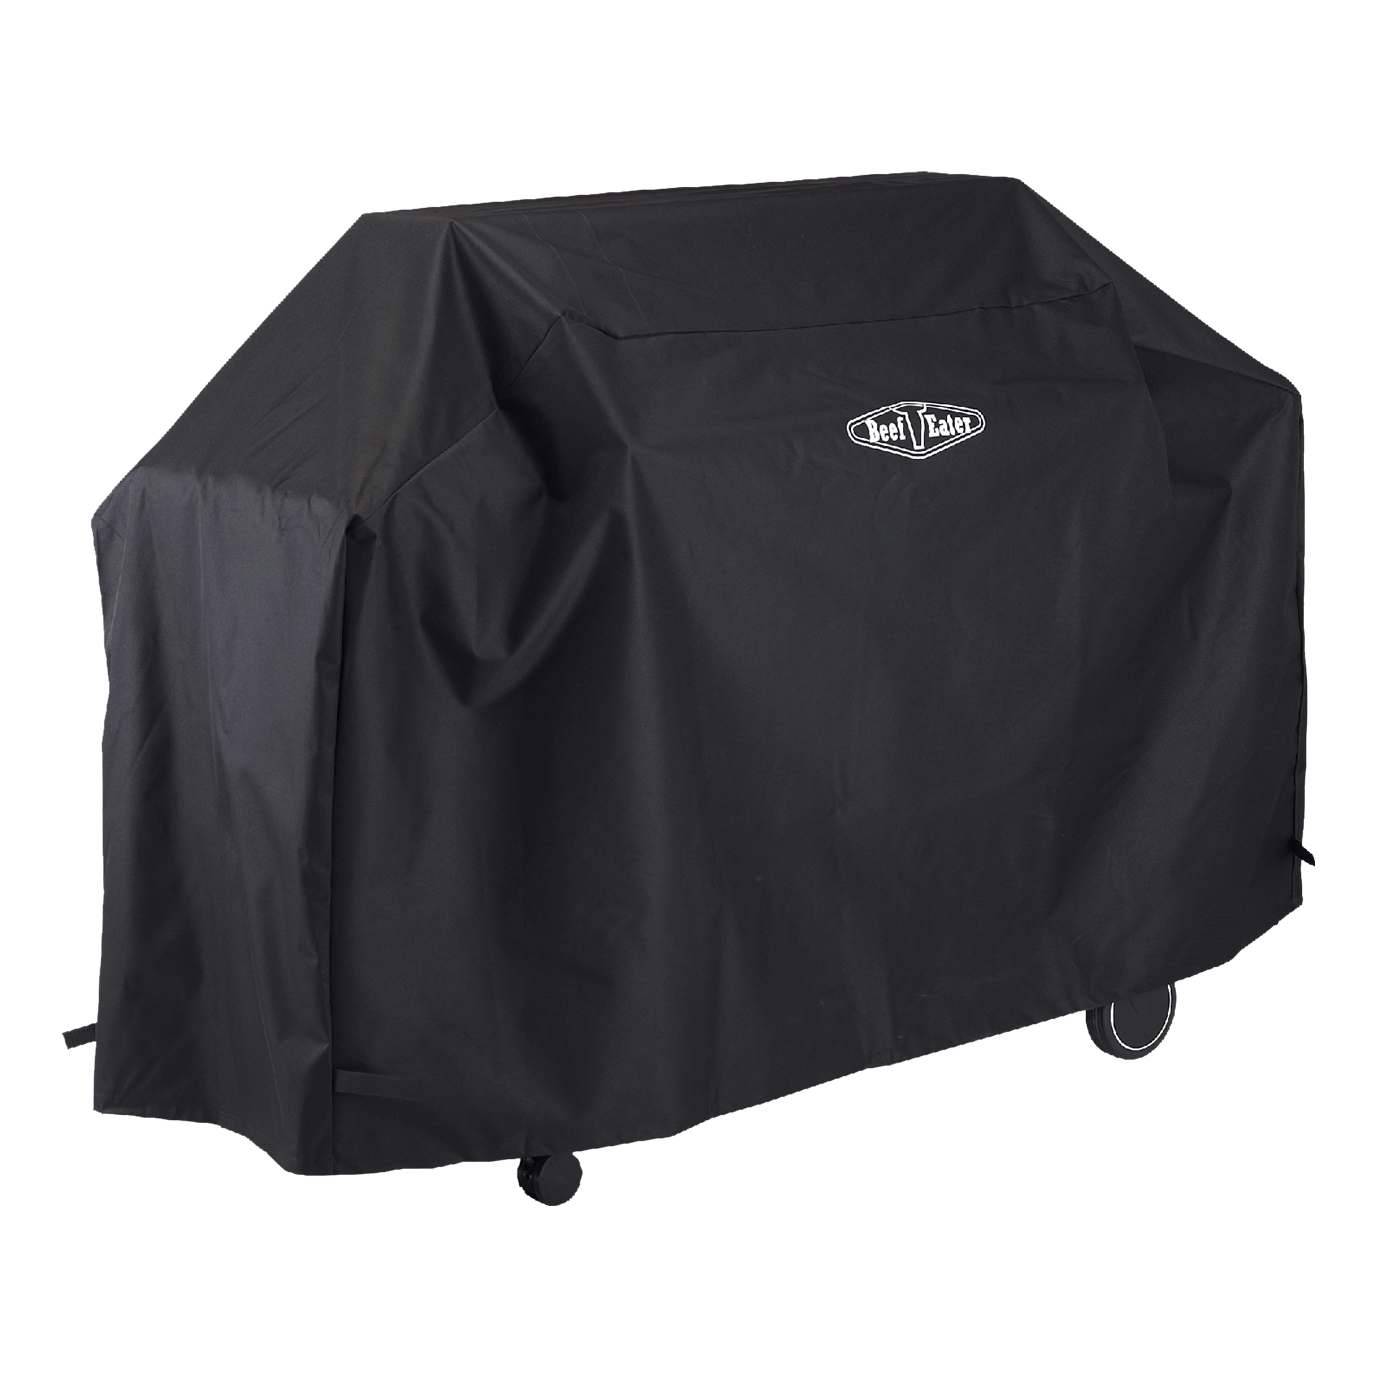 Beefeater All Weather BBQ Cover - 1500 / 1600 series 3 burner